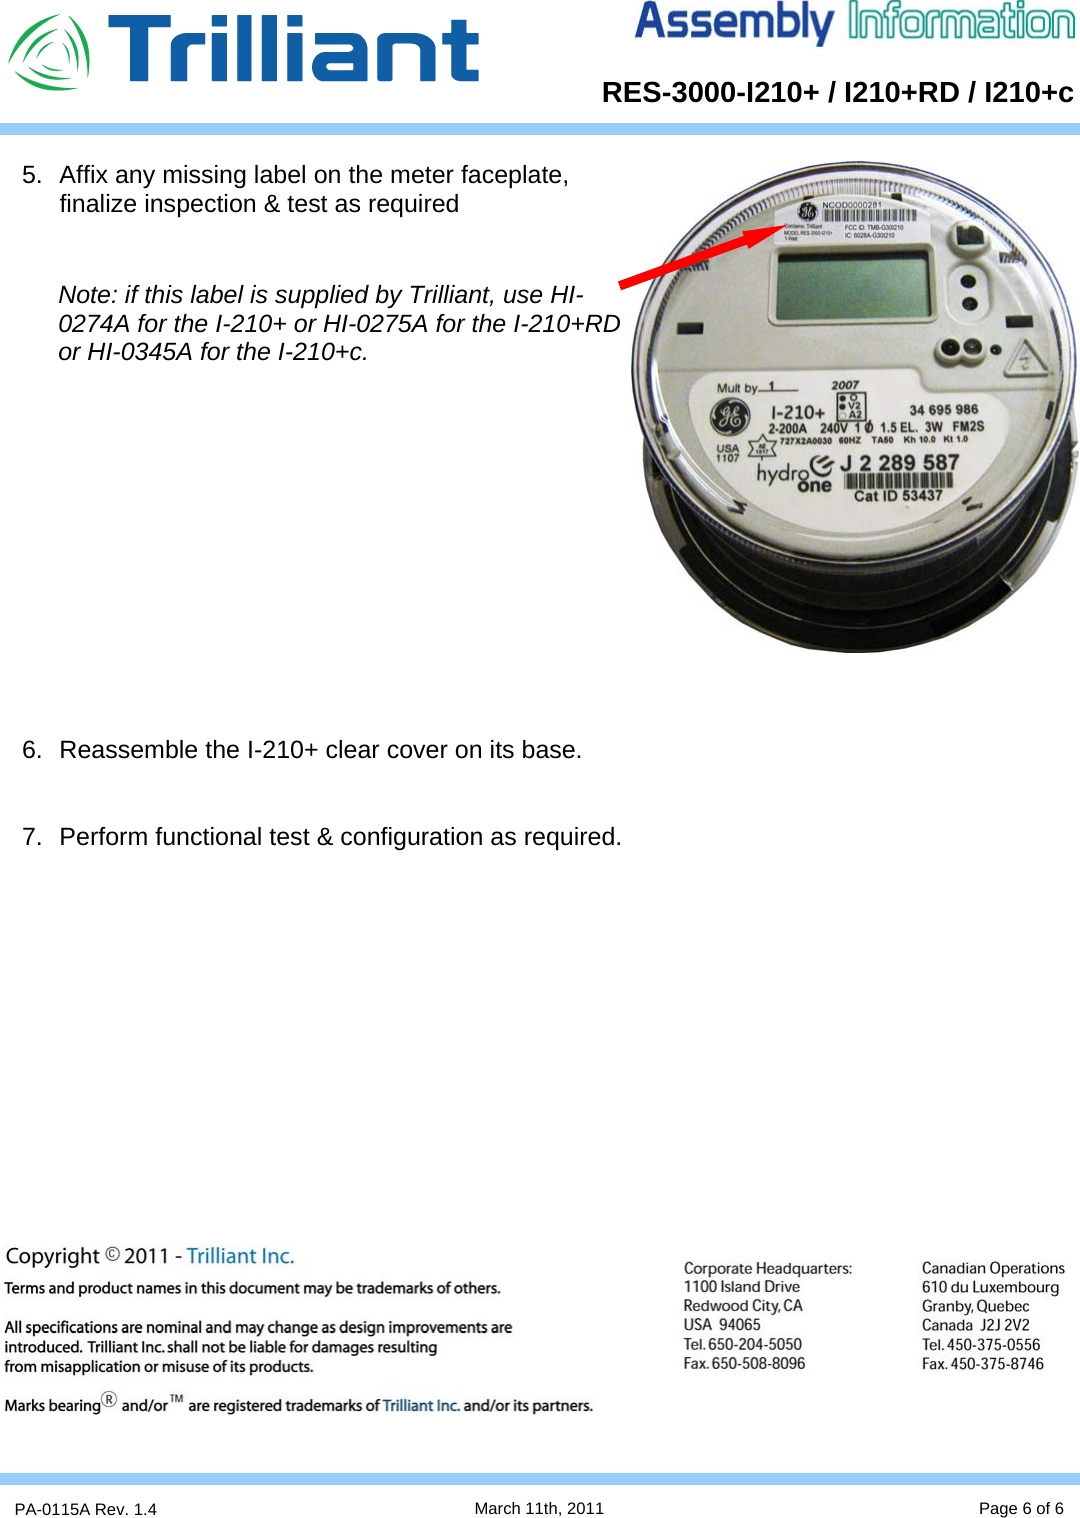      RES-3000-I210+ / I210+RD / I210+cPA-0115A Rev. 1.4  March 11th, 2011 Page 6 of 6 5.  Affix any missing label on the meter faceplate,  finalize inspection &amp; test as required                   6.  Reassemble the I-210+ clear cover on its base.   7.  Perform functional test &amp; configuration as required.               Note: if this label is supplied by Trilliant, use HI-0274A for the I-210+ or HI-0275A for the I-210+RD or HI-0345A for the I-210+c. 